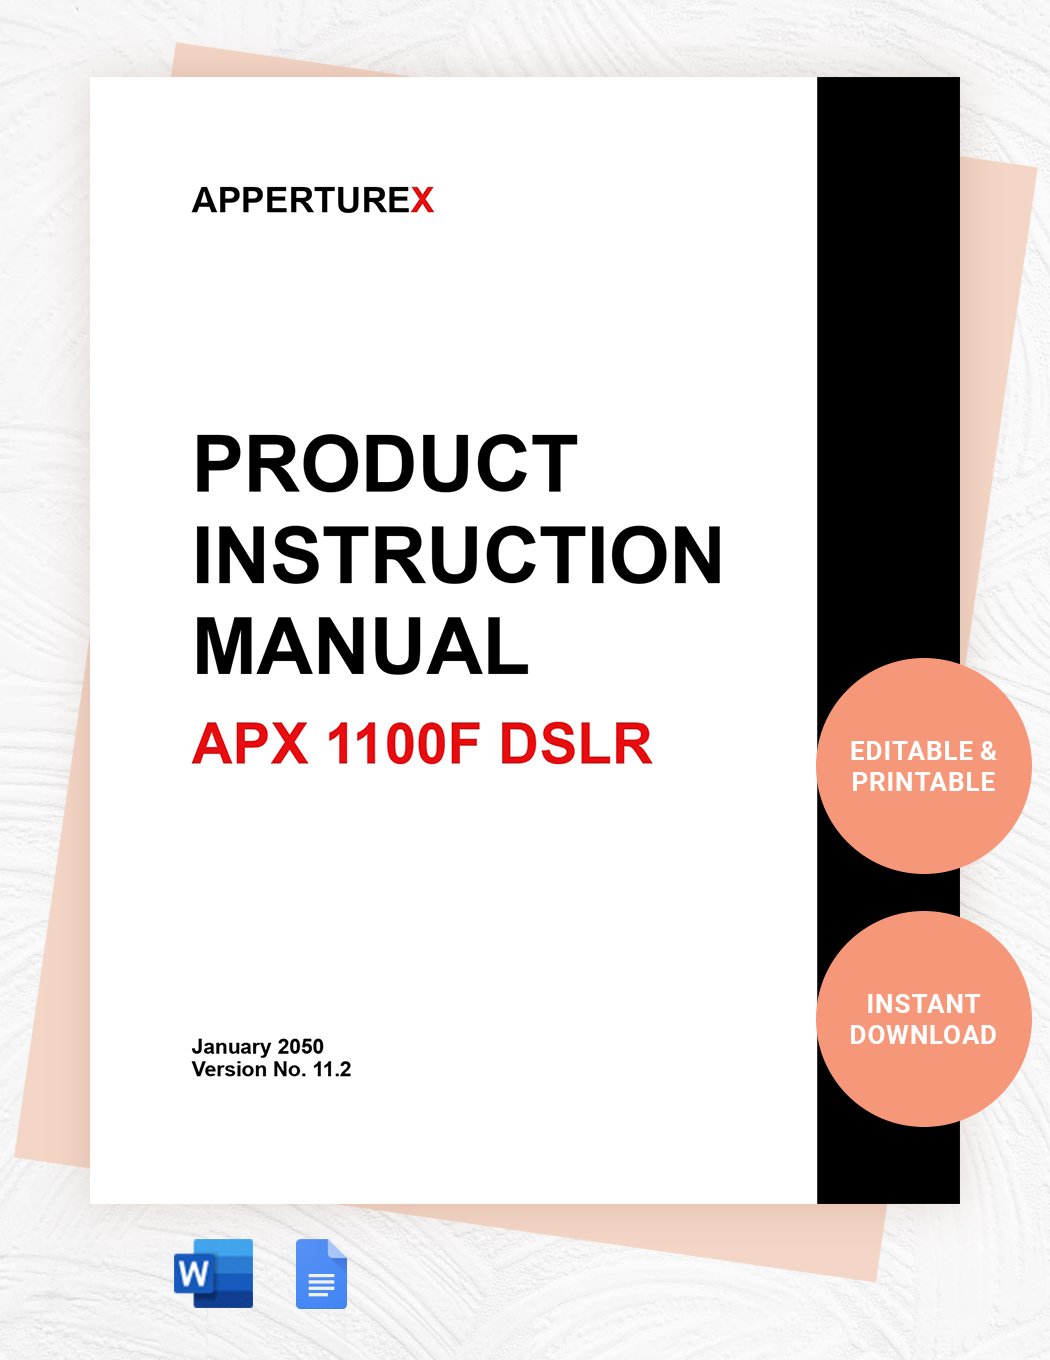 Product Instruction Manual Template